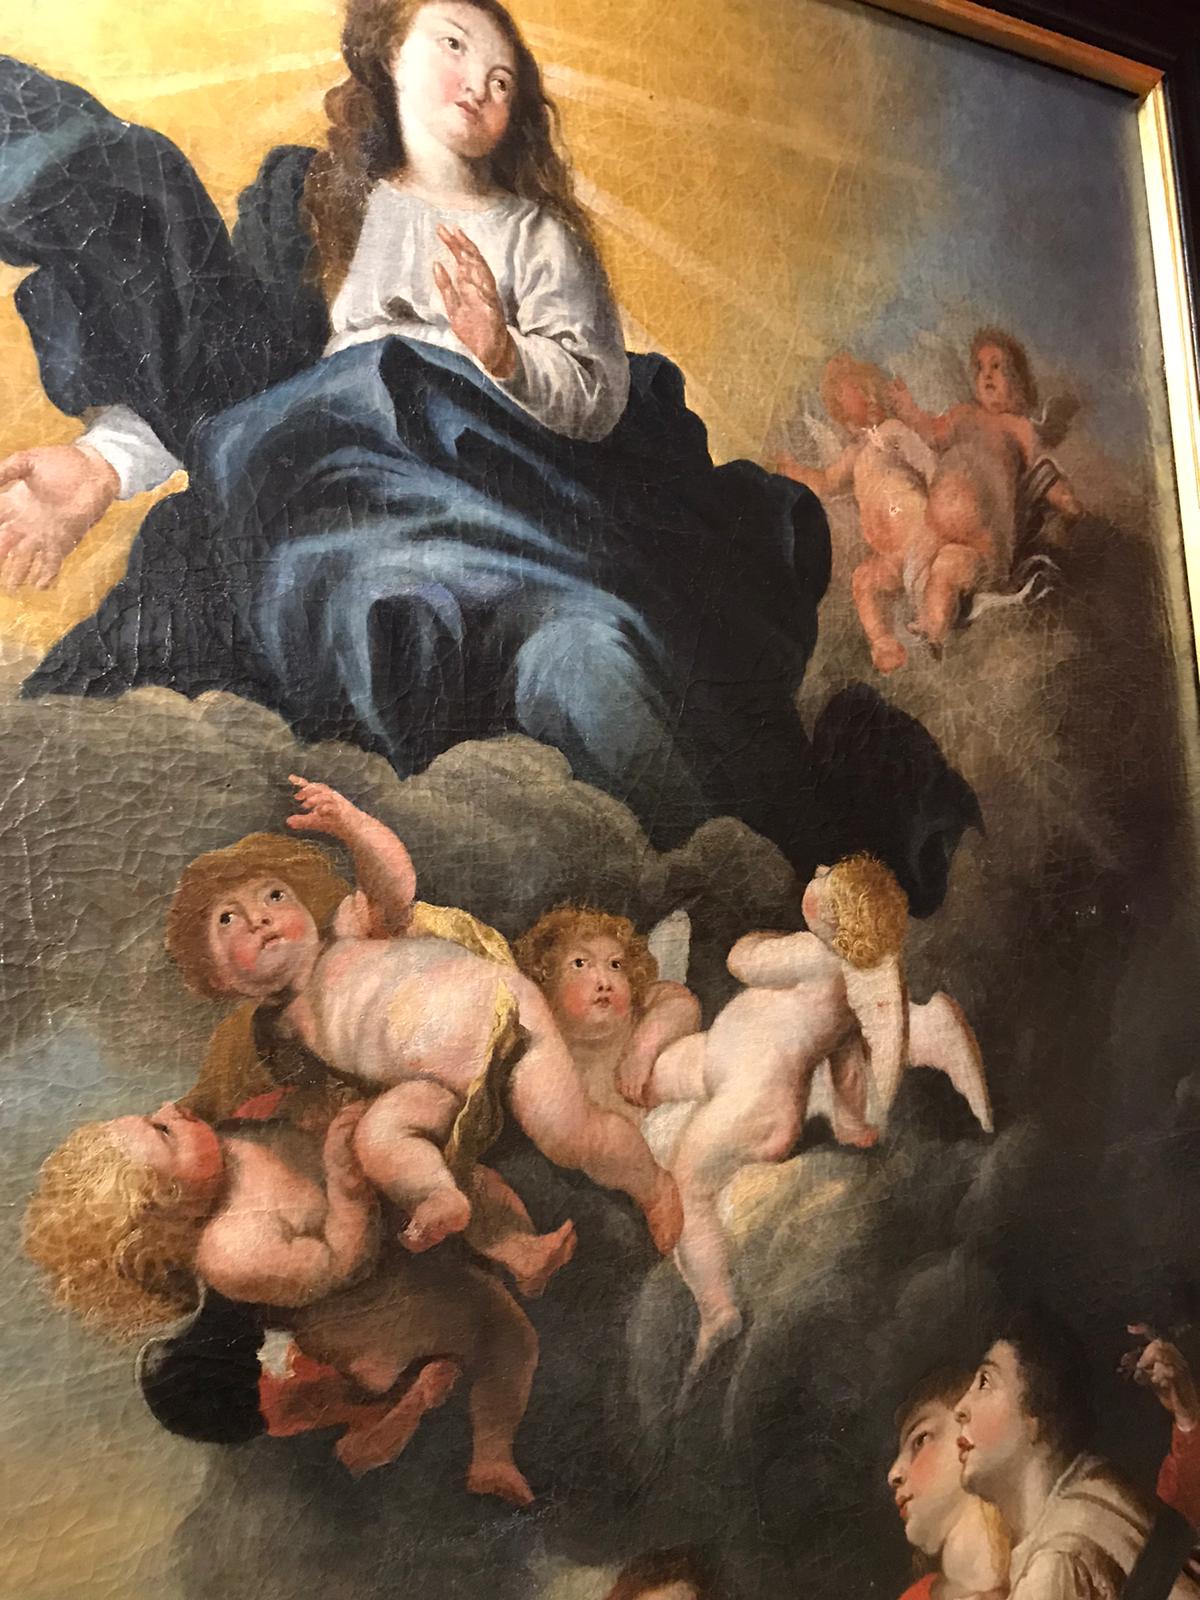 Ascension of the Madonna with the saints. 17th century Antwerp school.